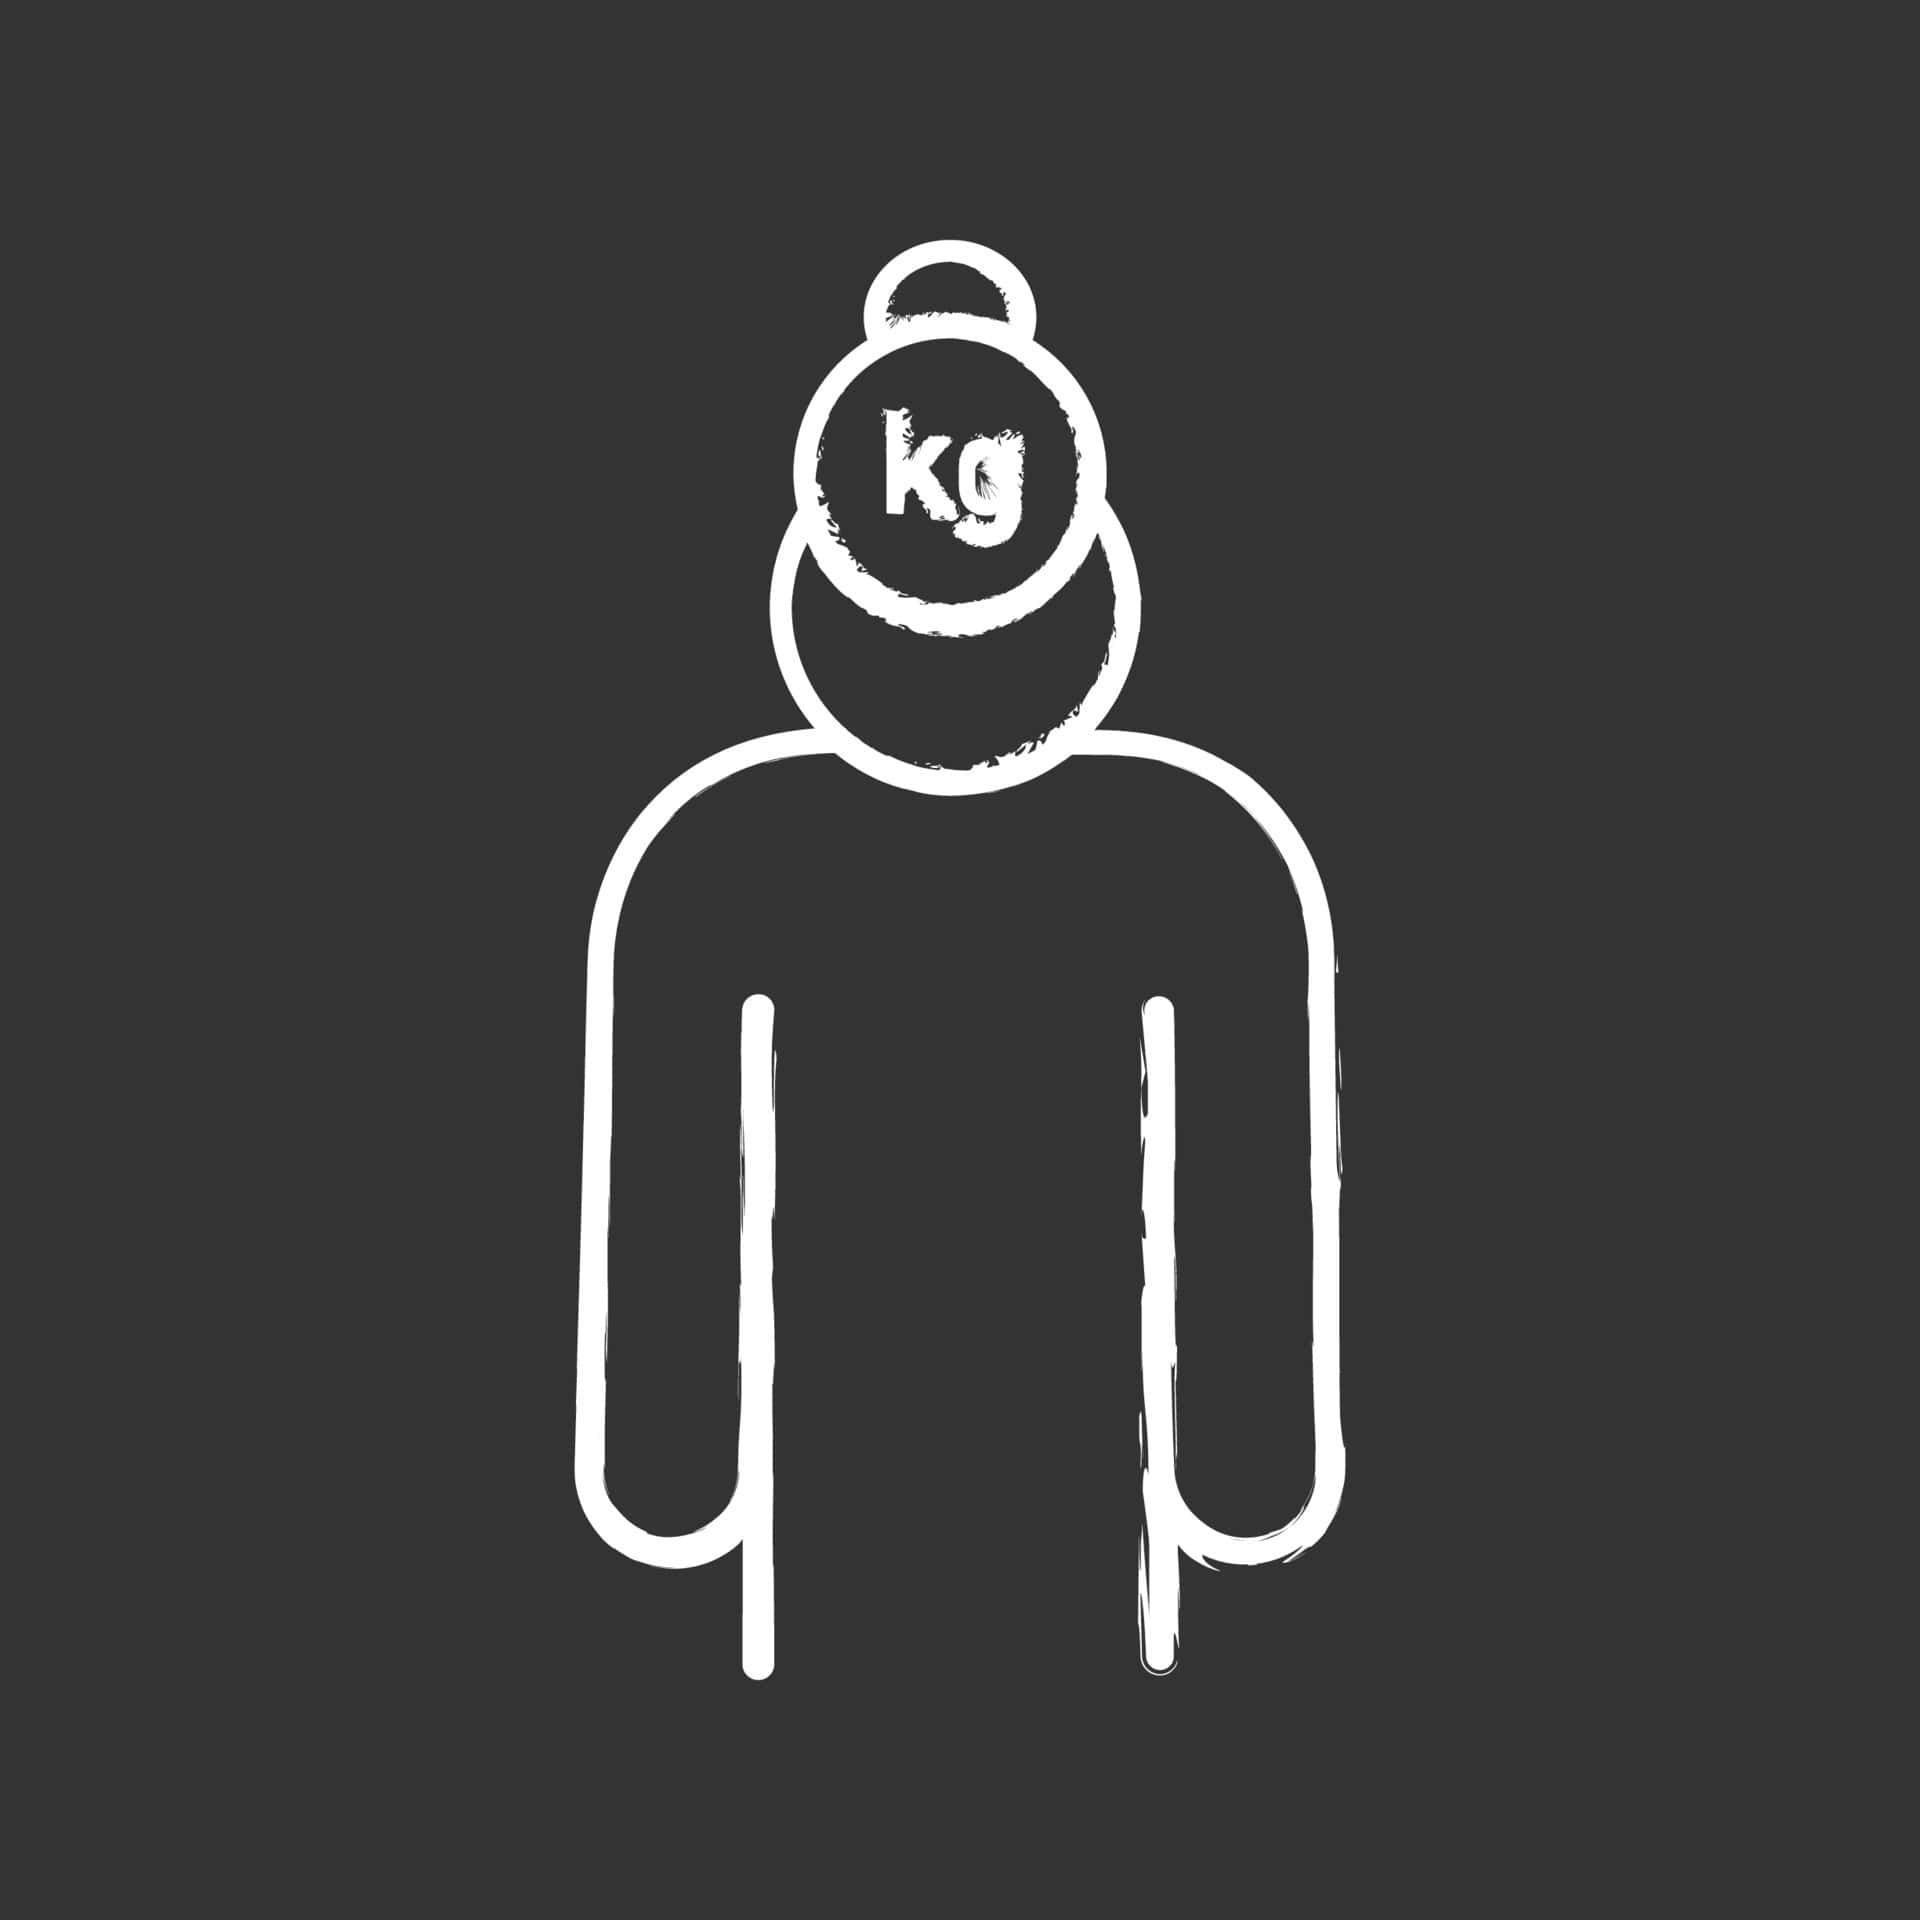 Stress Figure With Weights On Its Head Background